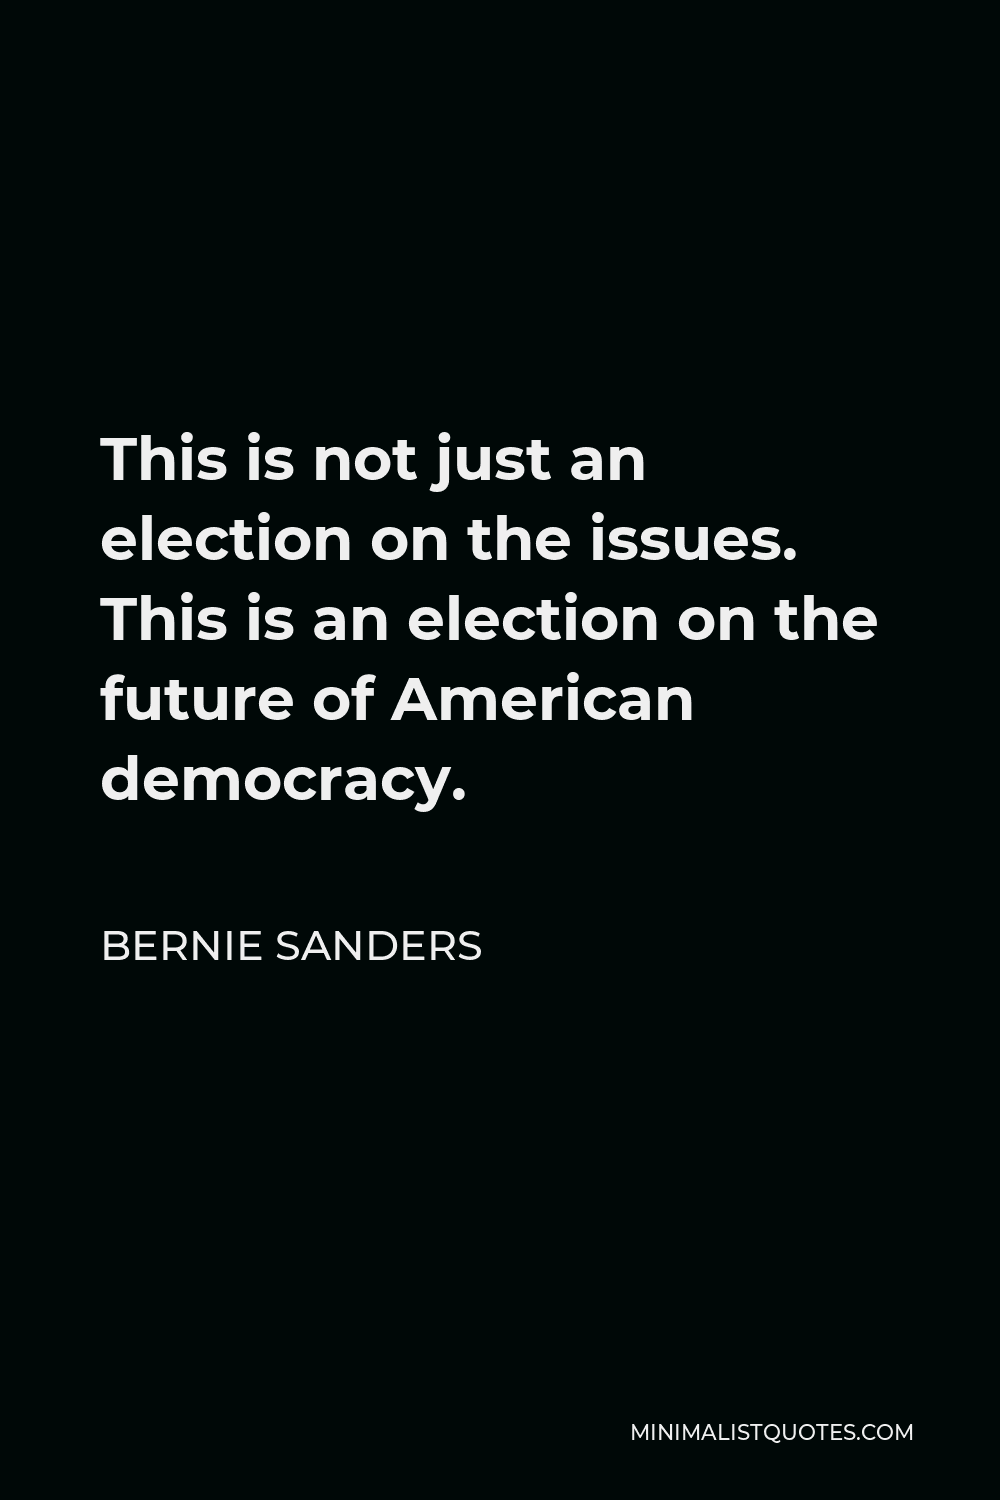 Bernie Sanders Quote - This is not just an election on the issues. This is an election on the future of American democracy.